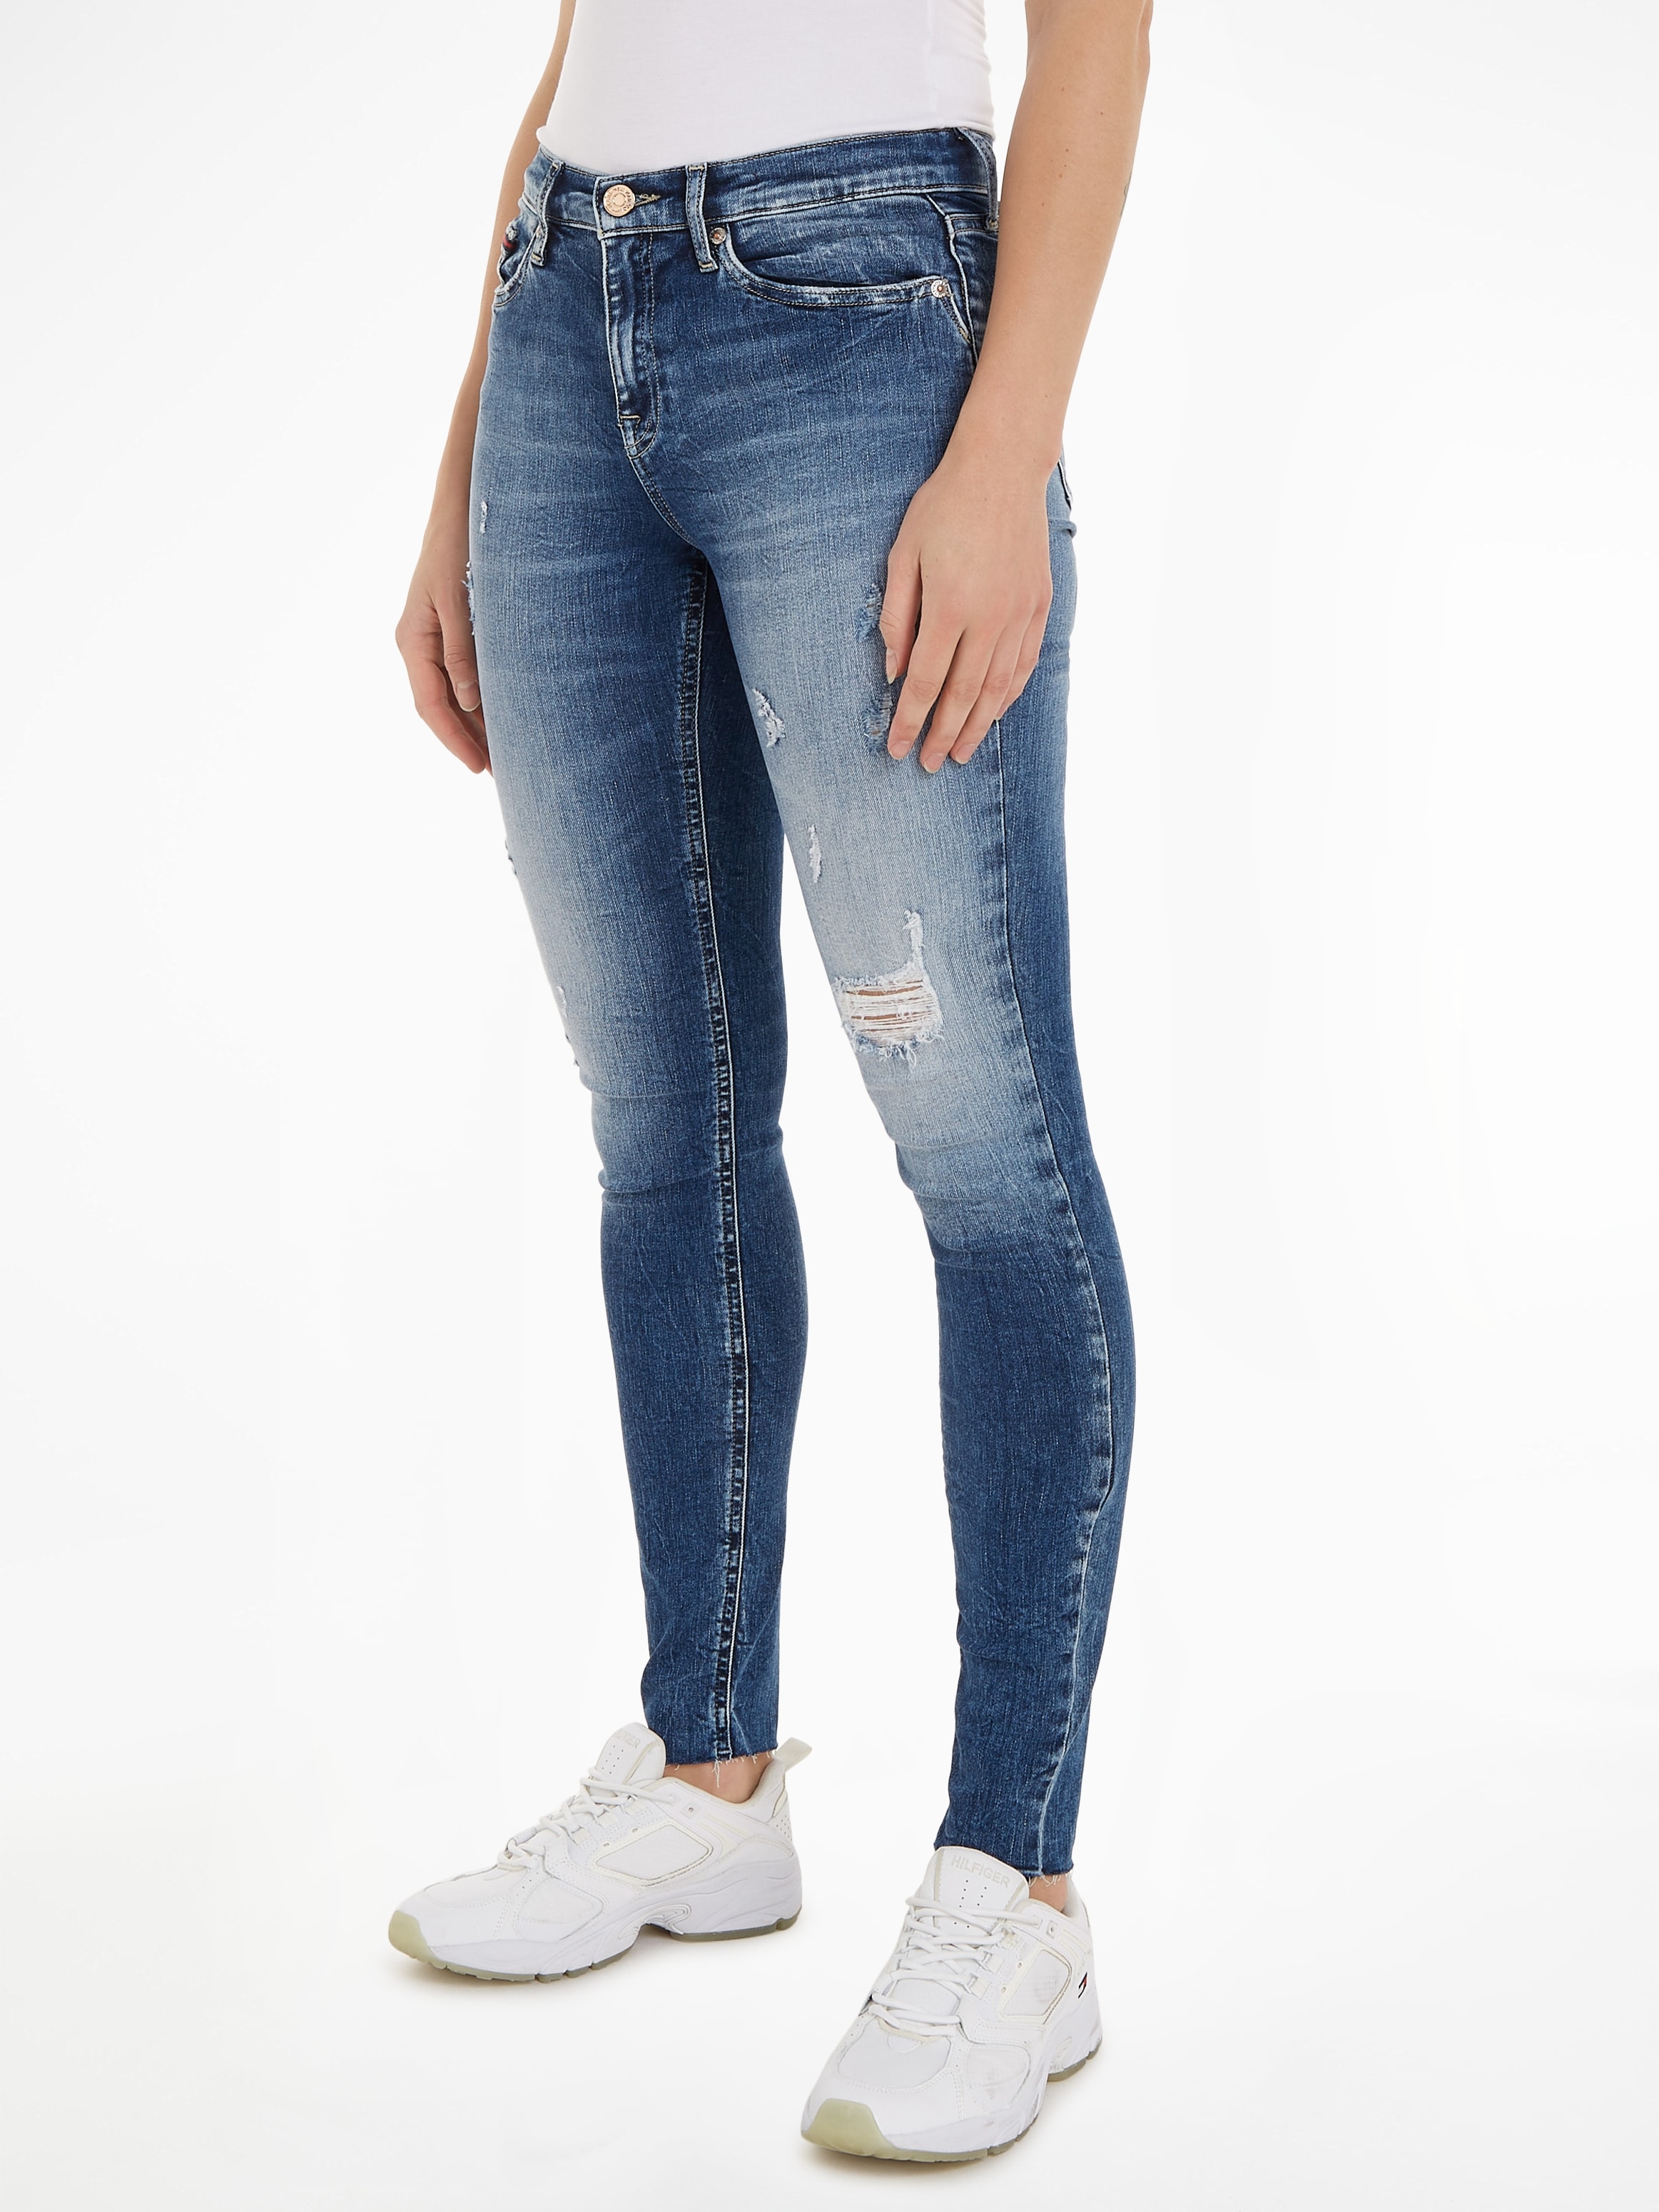 Tommy Jeans Skinny-fit-Jeans »NORA MR SKN CG2235«, mit Tomma Jeans  Markenbadge bei OTTO